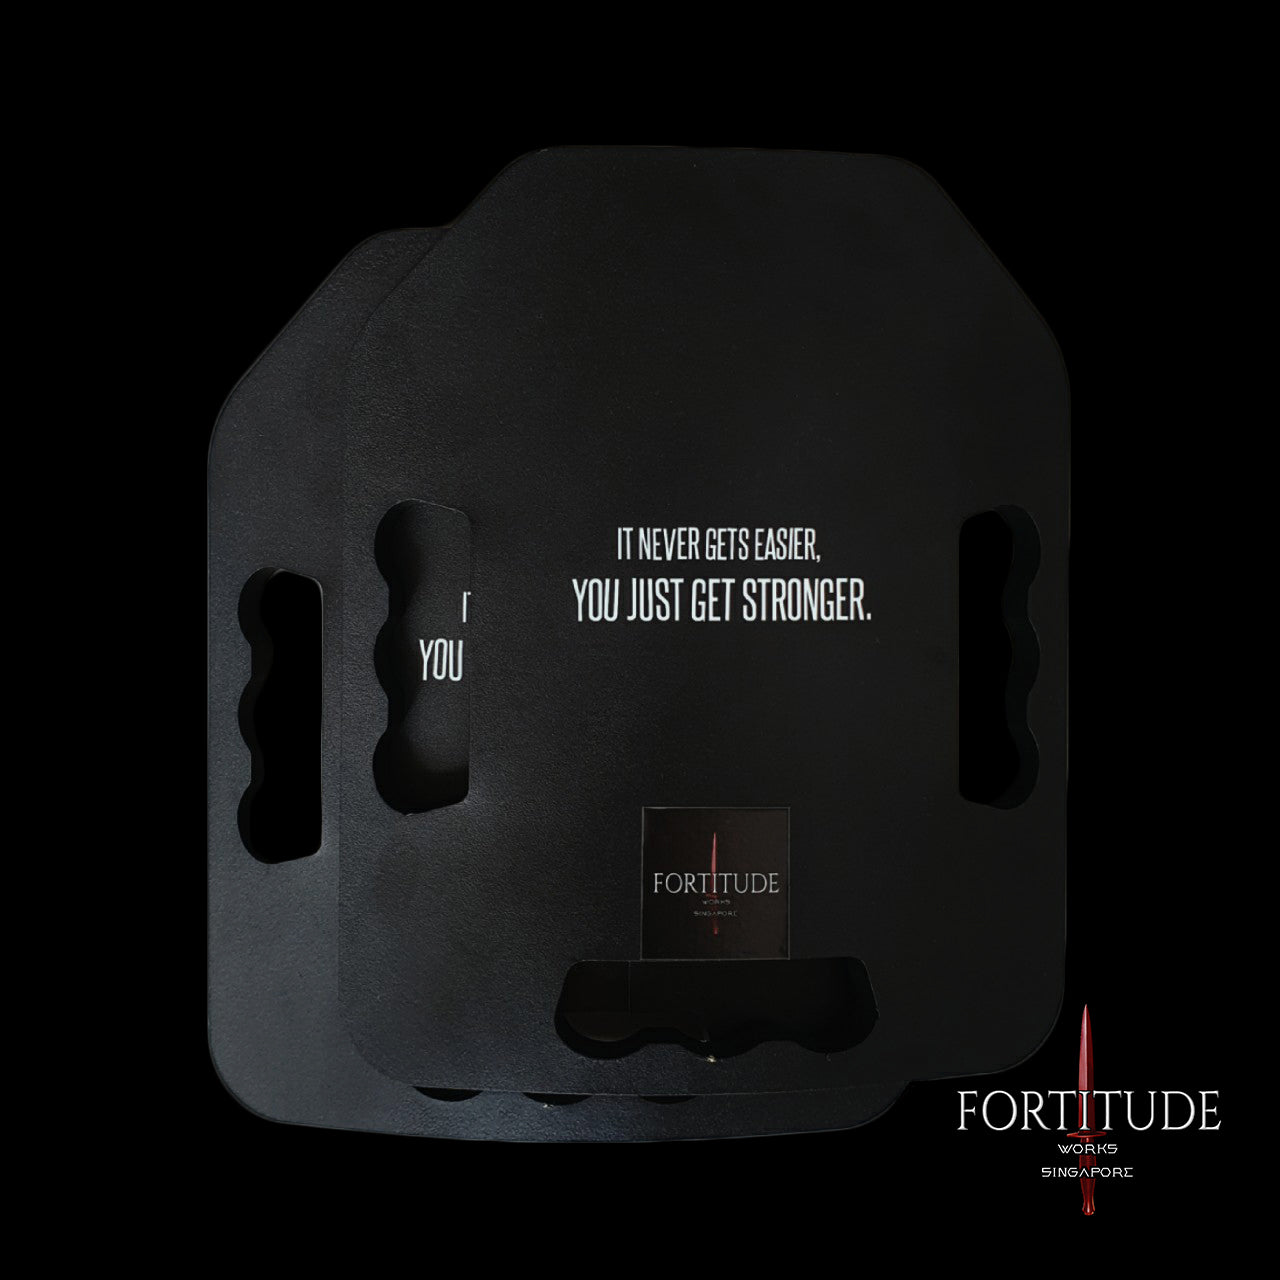 2 X 8 KG "The Fury" (16 KG Set) - FORTITUDE WORKS SINGAPORE